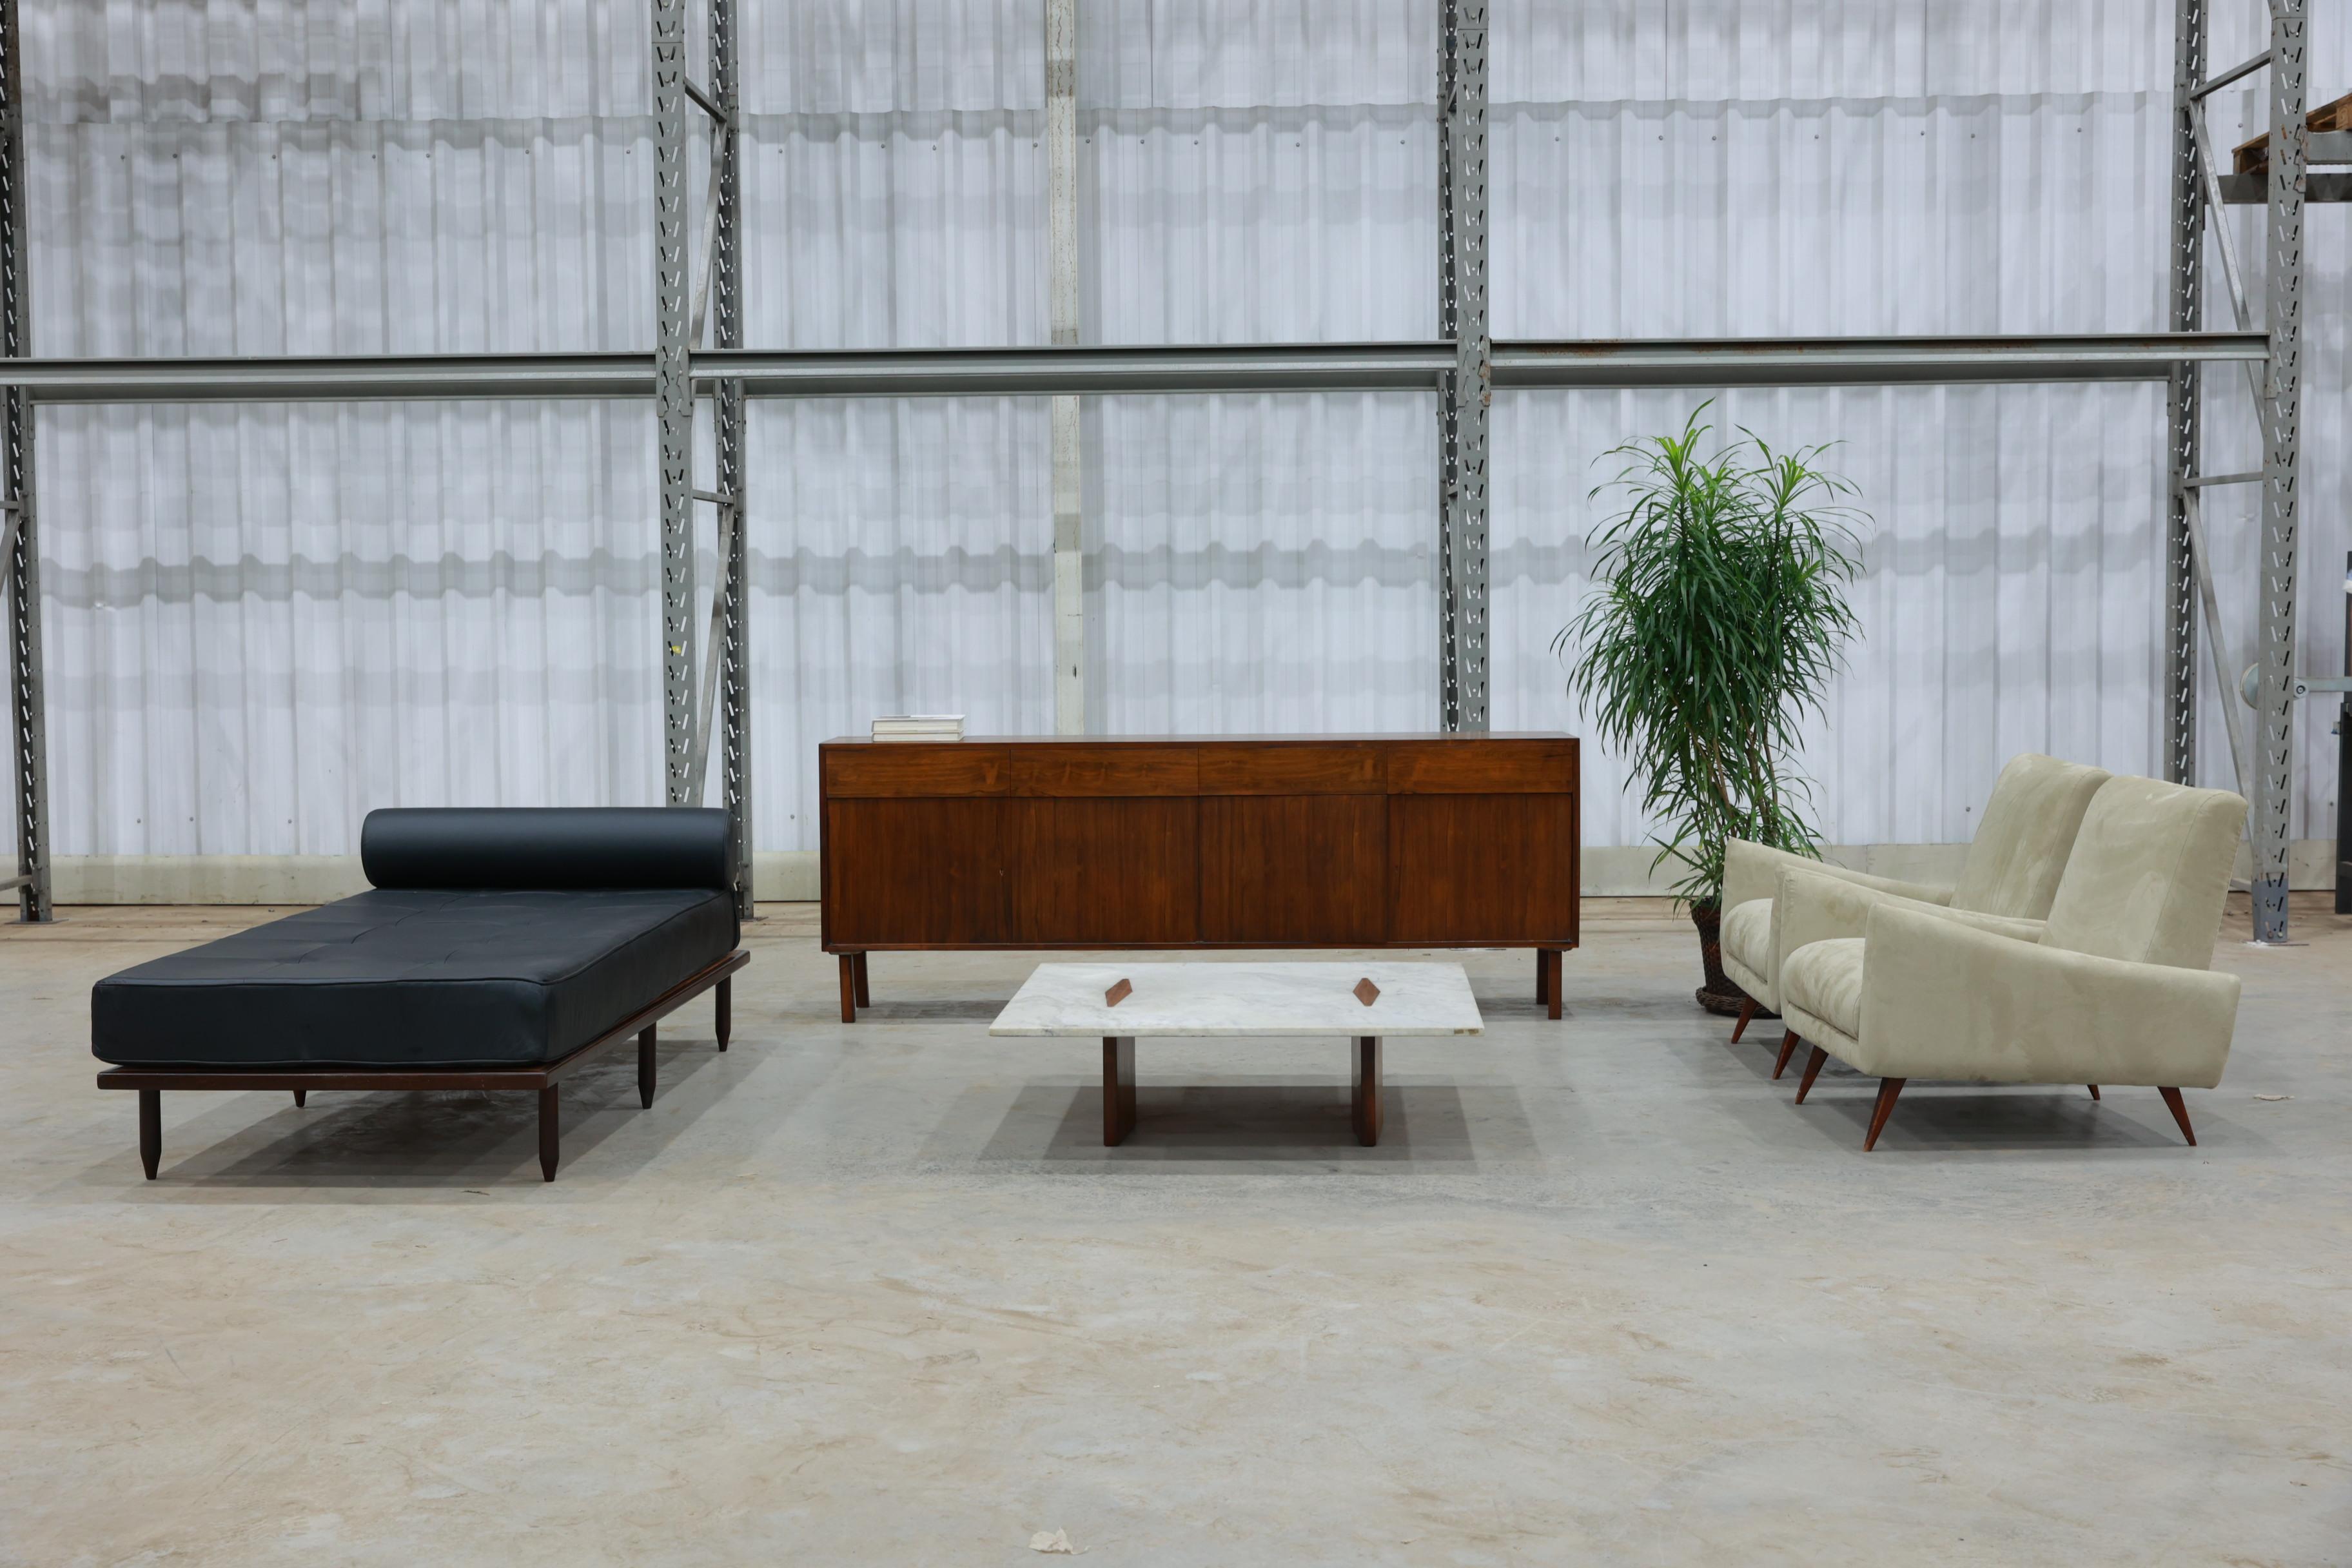 Available today in NYC with domestic free shipping included, this Brazilian Modern Daybed in Hardwood & Black Leather, Carlo Hauner made in Brazil in the 50s is nothing less than spectacular!

This rare daybed was designed by Carlo Hauner for Forma